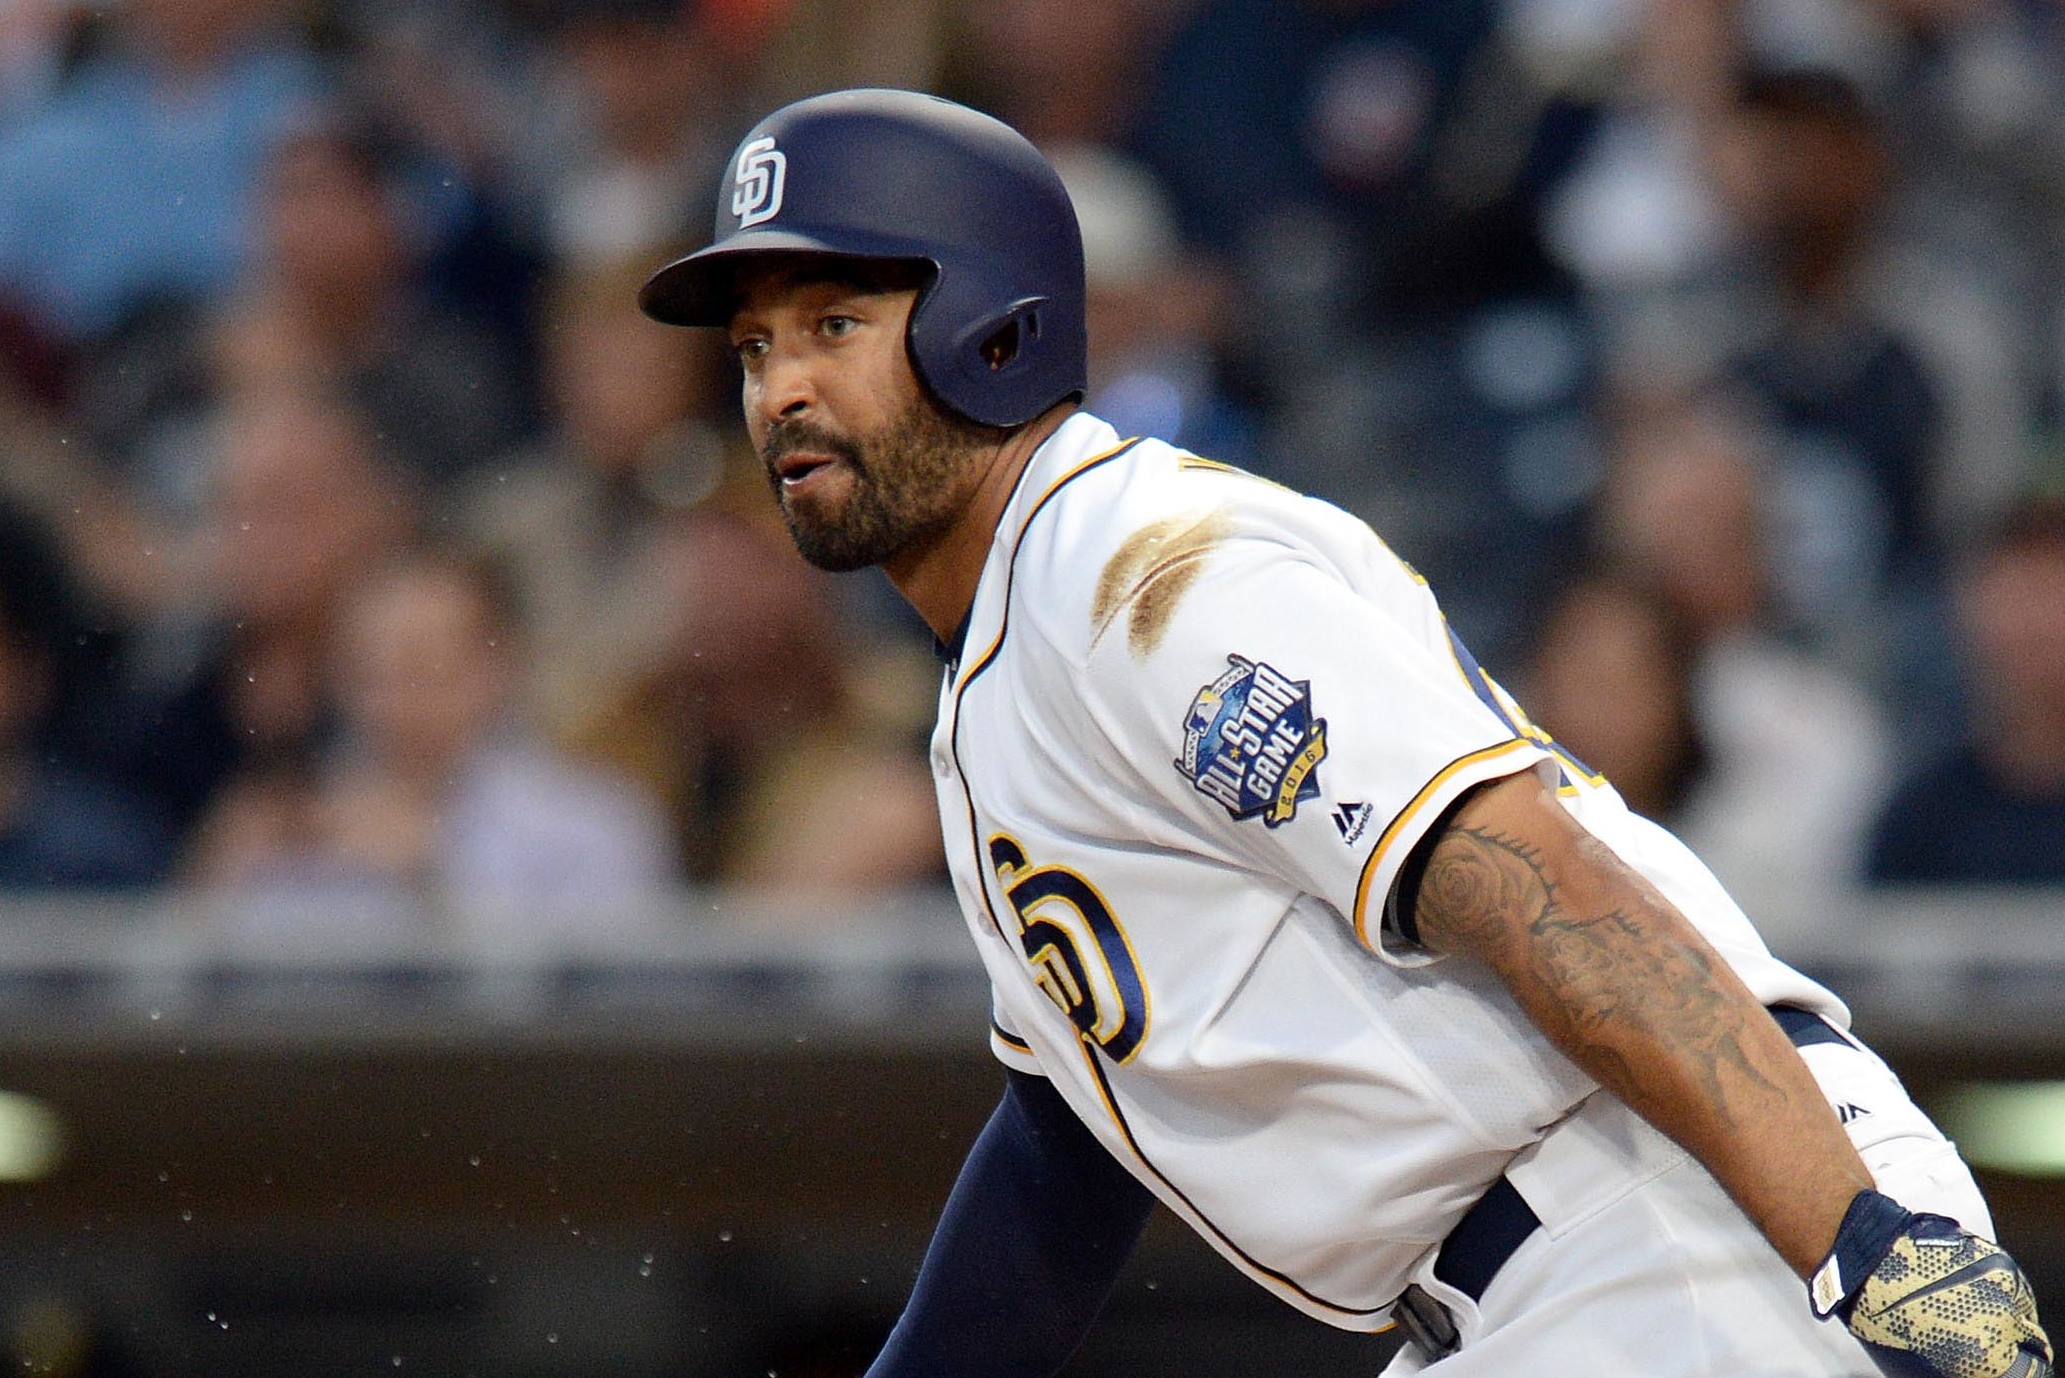 MATT KEMP steps up to the plate during the game – Stock Editorial